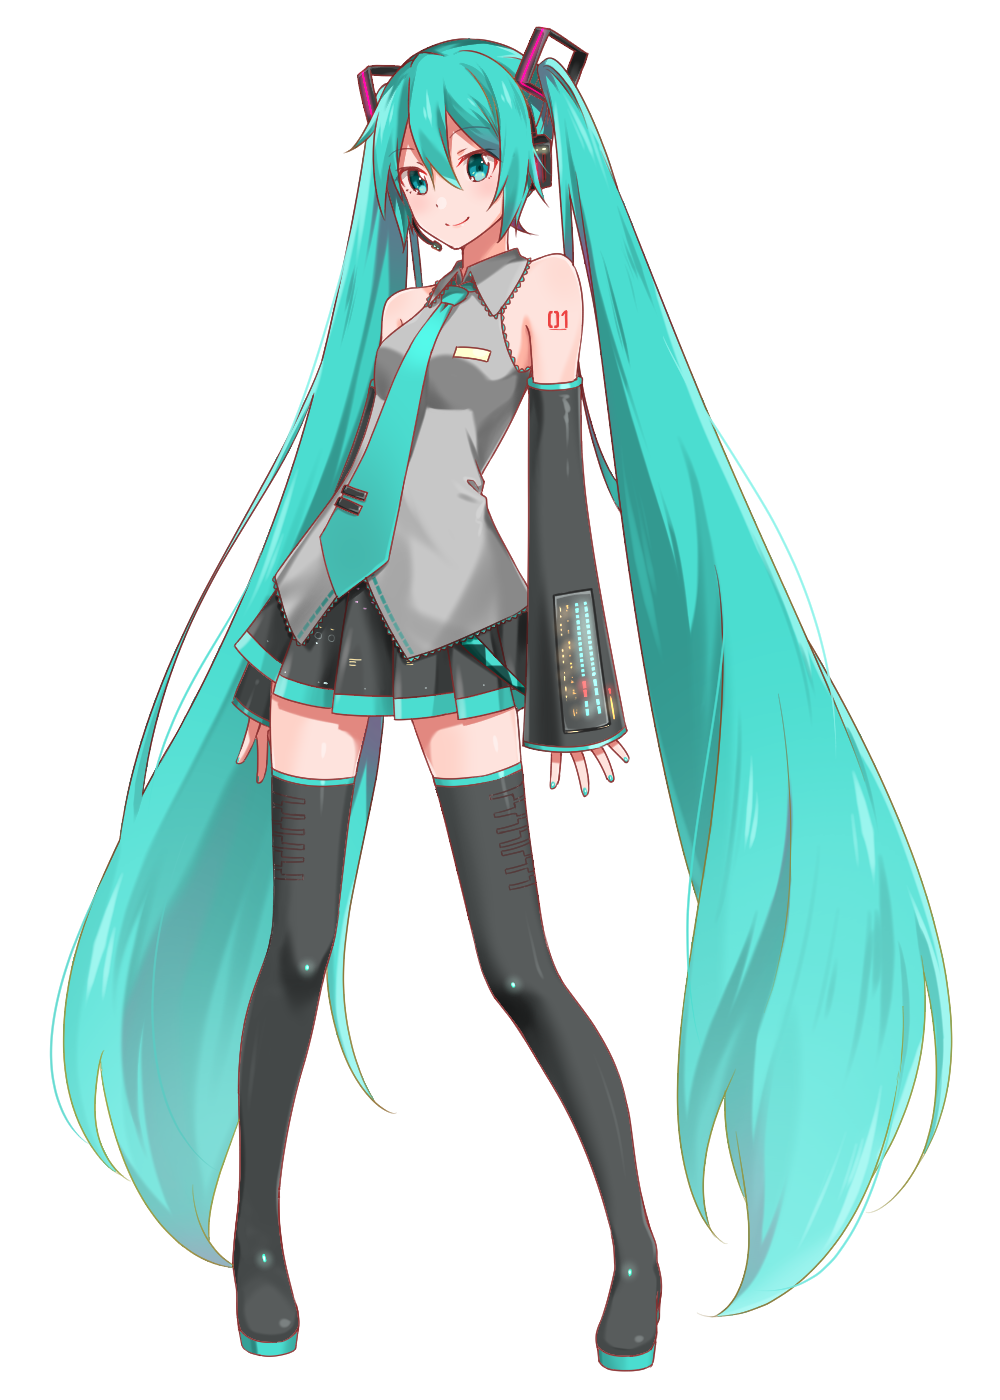 1girl aqua_eyes aqua_hair aqua_neckwear black_legwear black_skirt closed_mouth commentary_request derivative_work detached_sleeves full_body hatsune_miku headset highres long_hair looking_at_viewer necktie shoulder_tattoo simple_background skirt sleeves_past_wrists smile so_ra_01_02 solo standing tattoo thigh-highs twintails twitter_username very_long_hair vocaloid vocaloid_boxart_pose white_background zettai_ryouiki